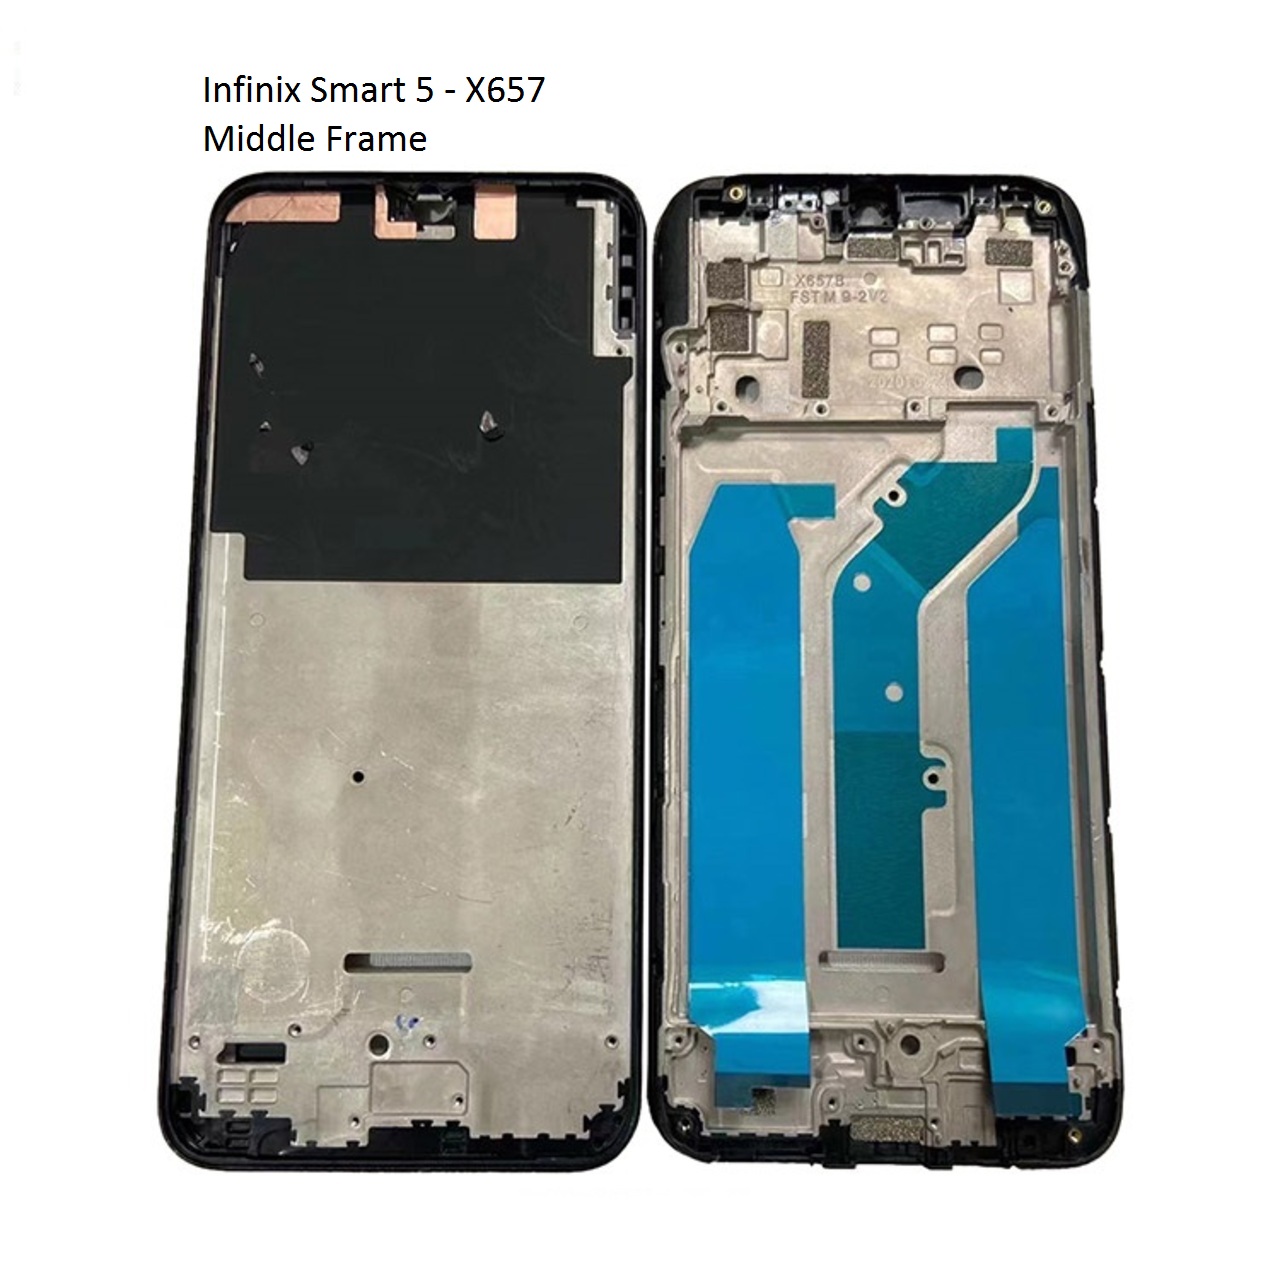 MIDDLE-FRAME-LCD-INFINIX-X657-SMART-5